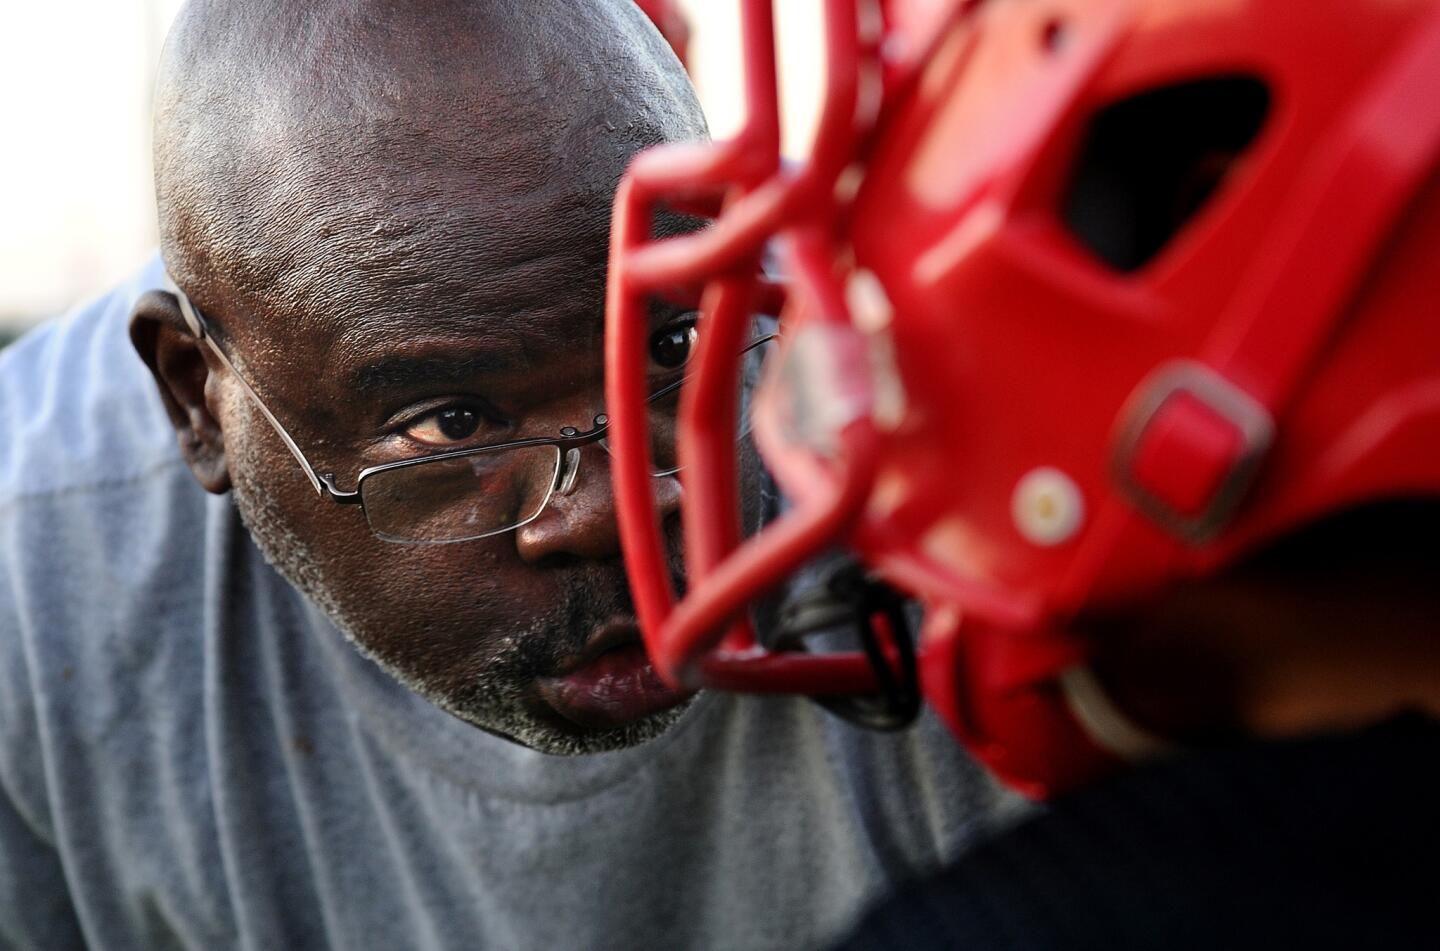 Football coach and youth sports program president Keith Johnson instructs a player during practice at Gompers Middle School in South Los Angeles. The Falcons’ motto says it all: “Teaching New-Style Kids Old-School Values.”